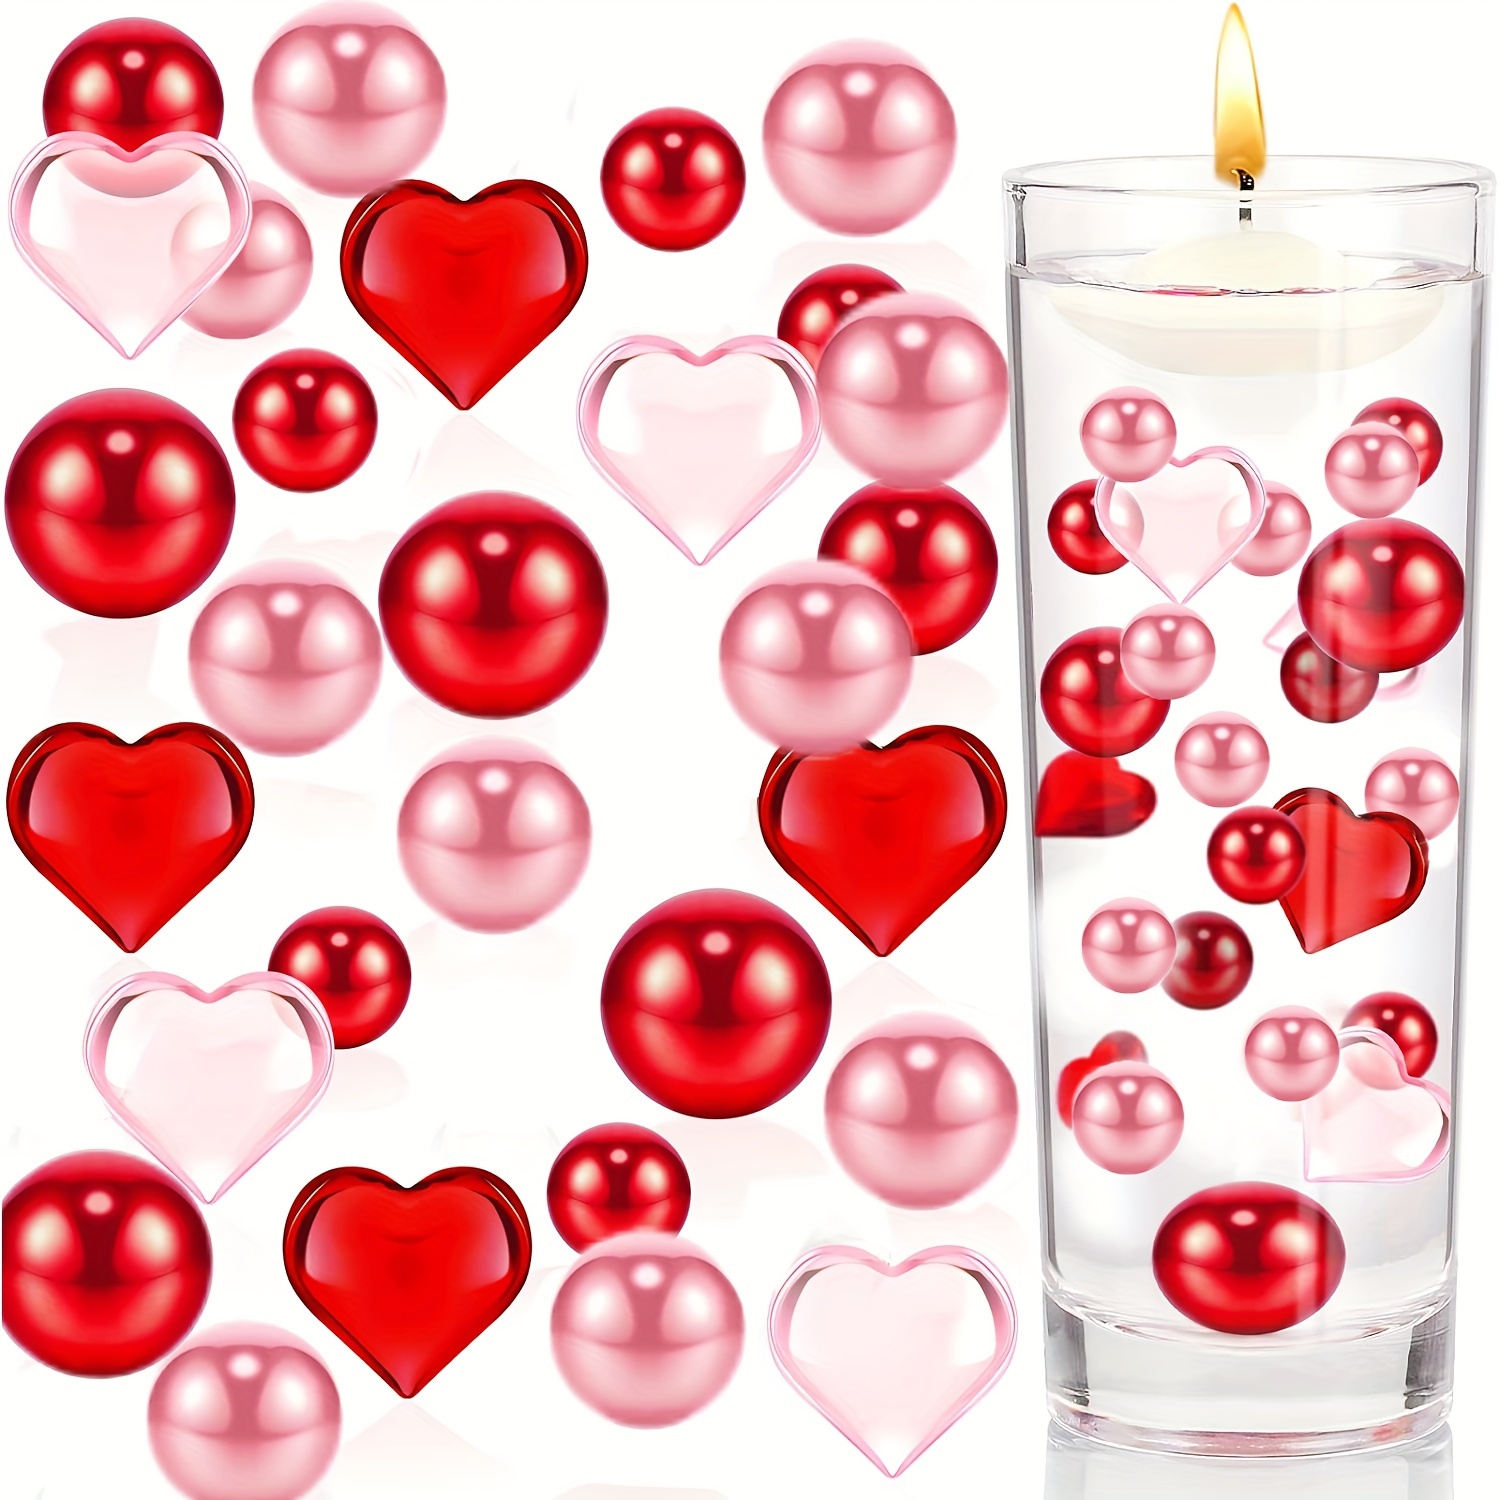 110pcs Valentine's Day Vase Filler, Pearls Heart Acrylic Floating Candle  Centerpieces For Valentine's Day Wedding Home Party Table Decoration